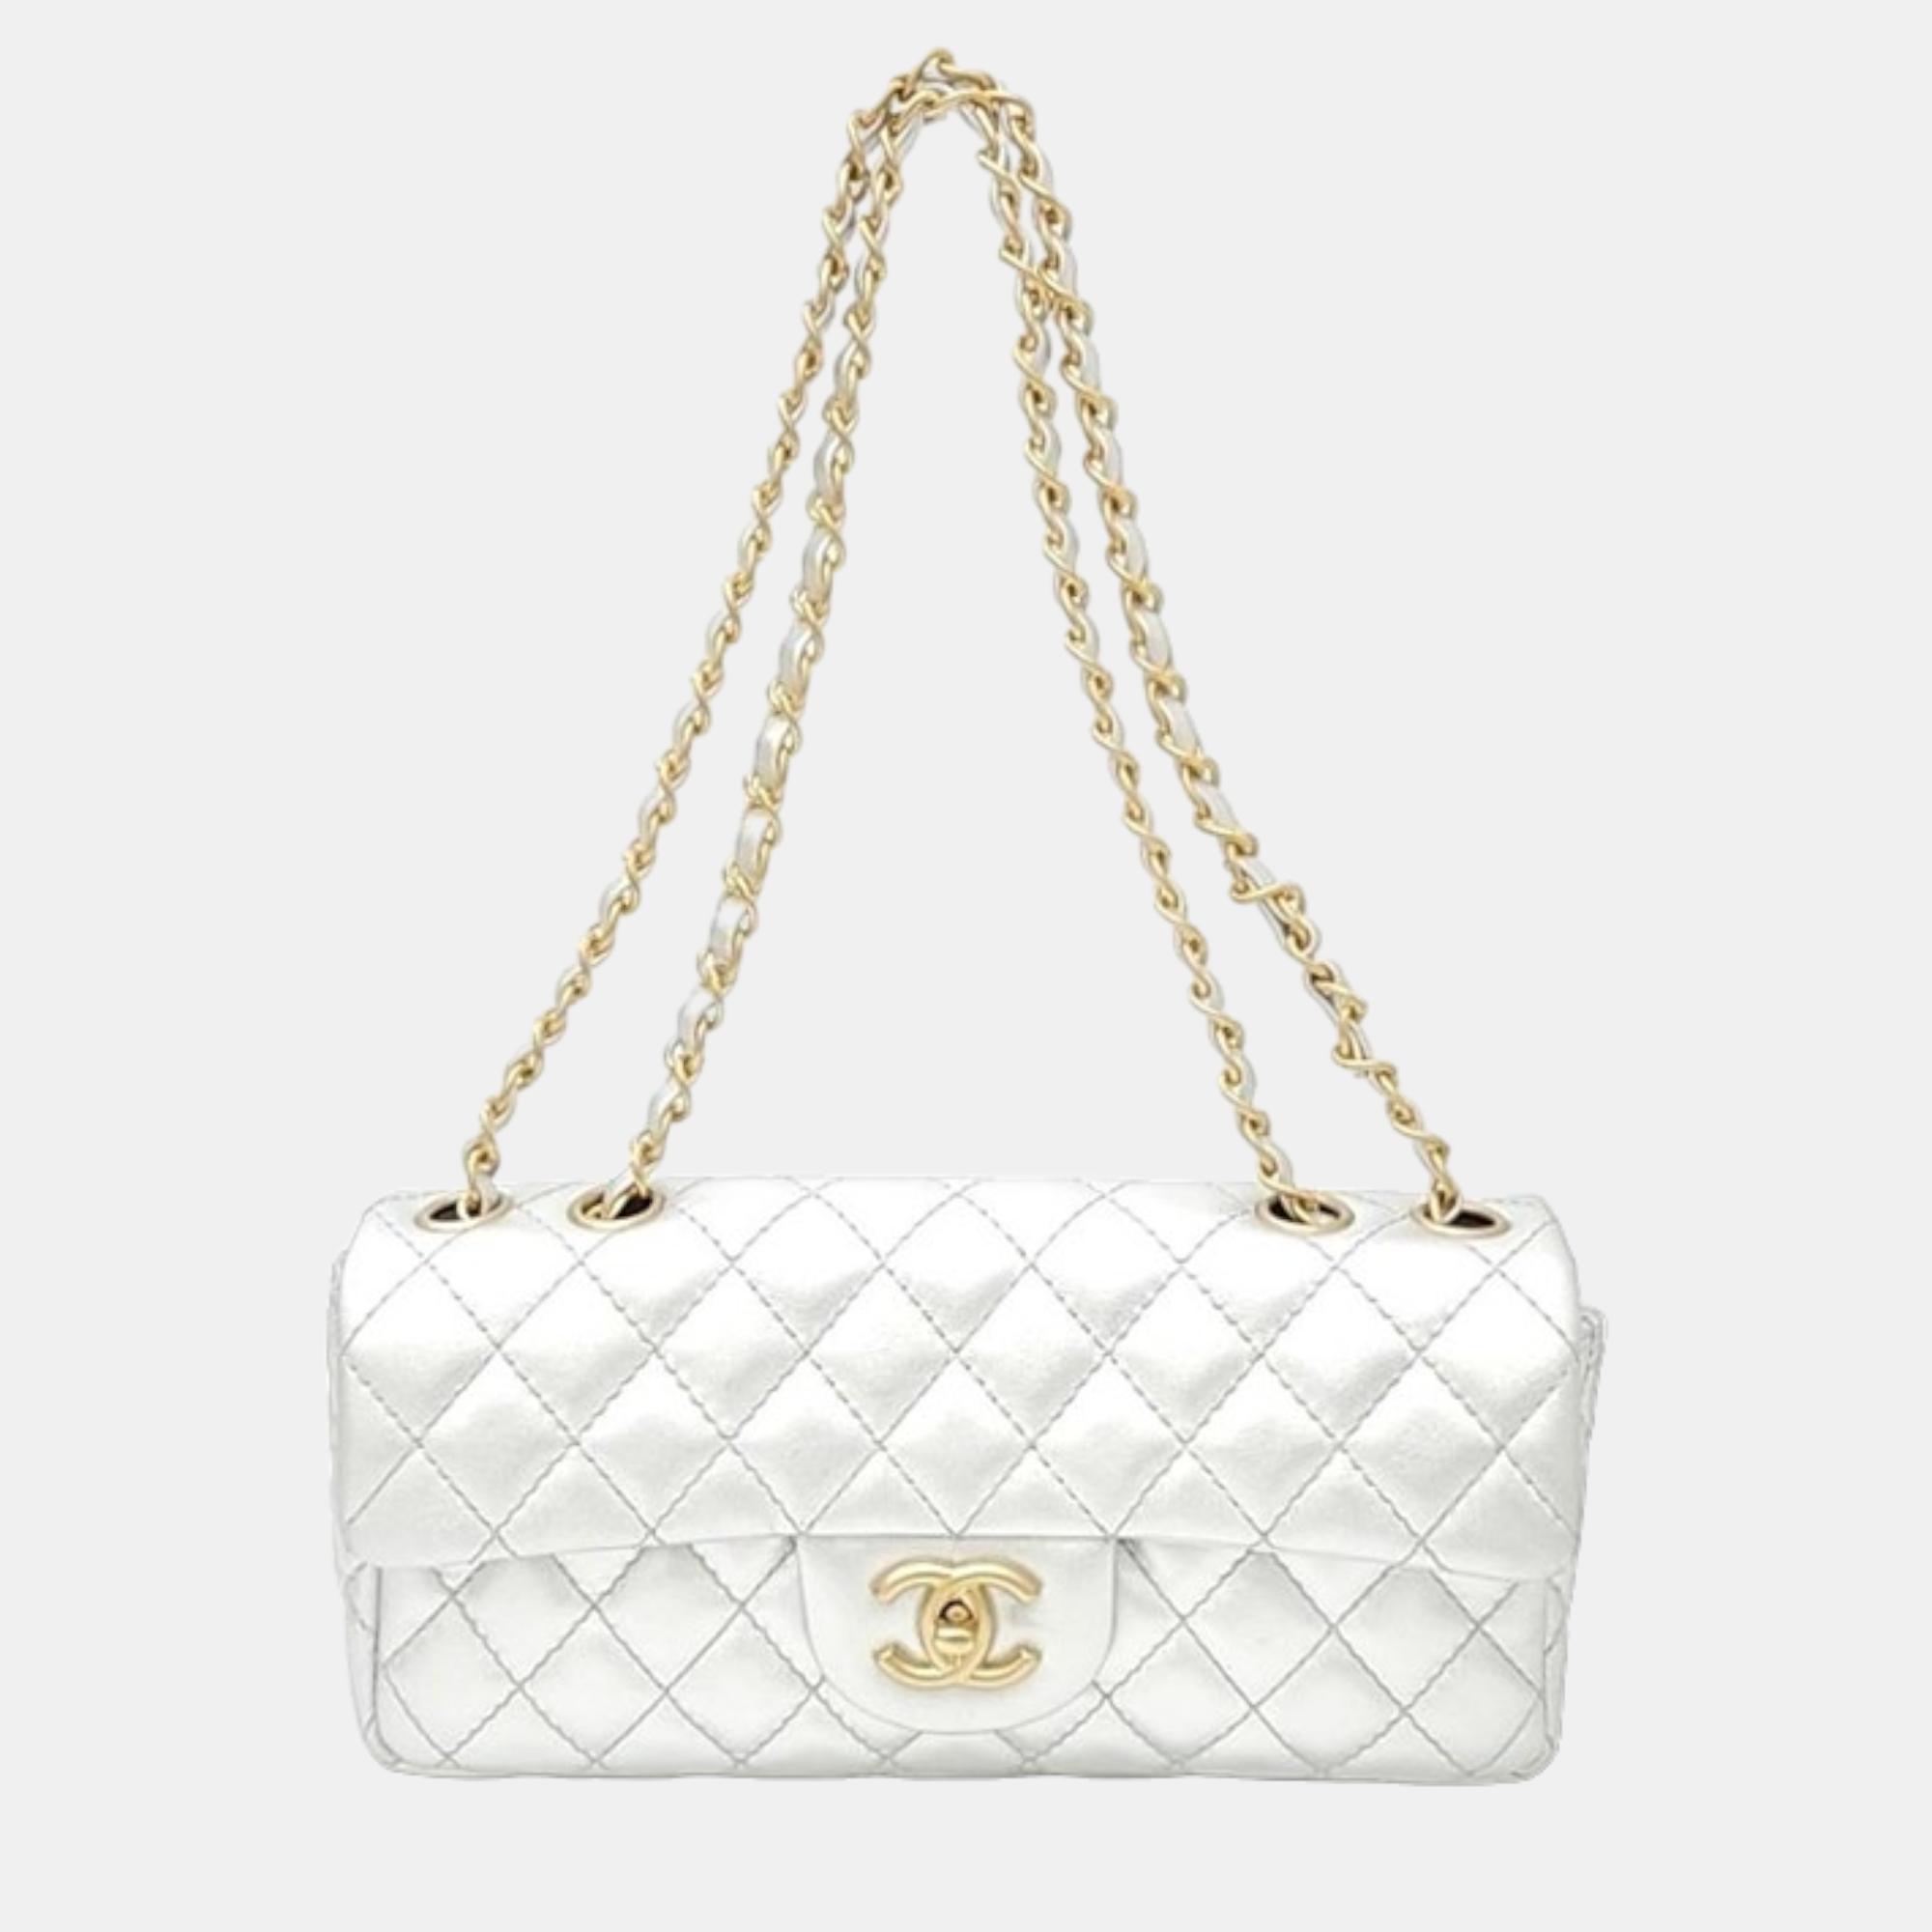 Chanel White Leather Classic Single Flap Shoulder Bag